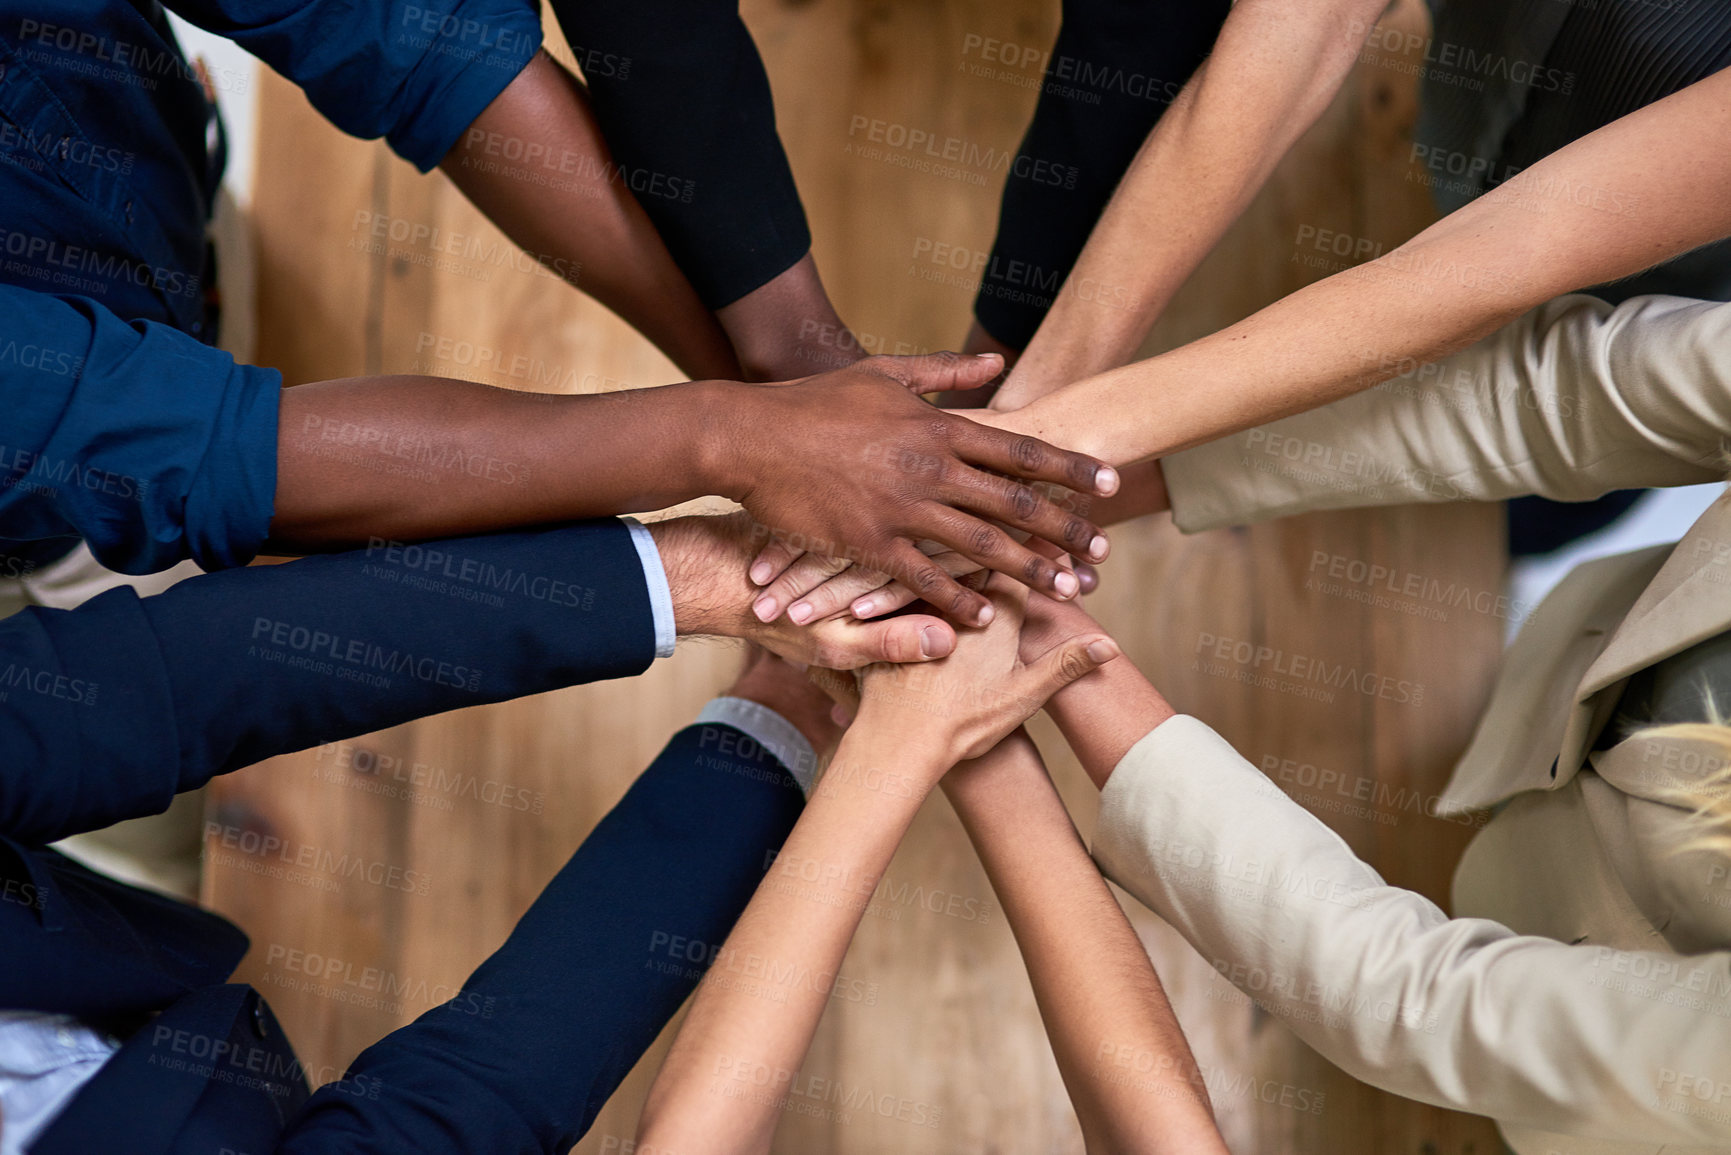 Buy stock photo High angle shot of a group of unidentifiable businesspeople piling their hands in unity in the office